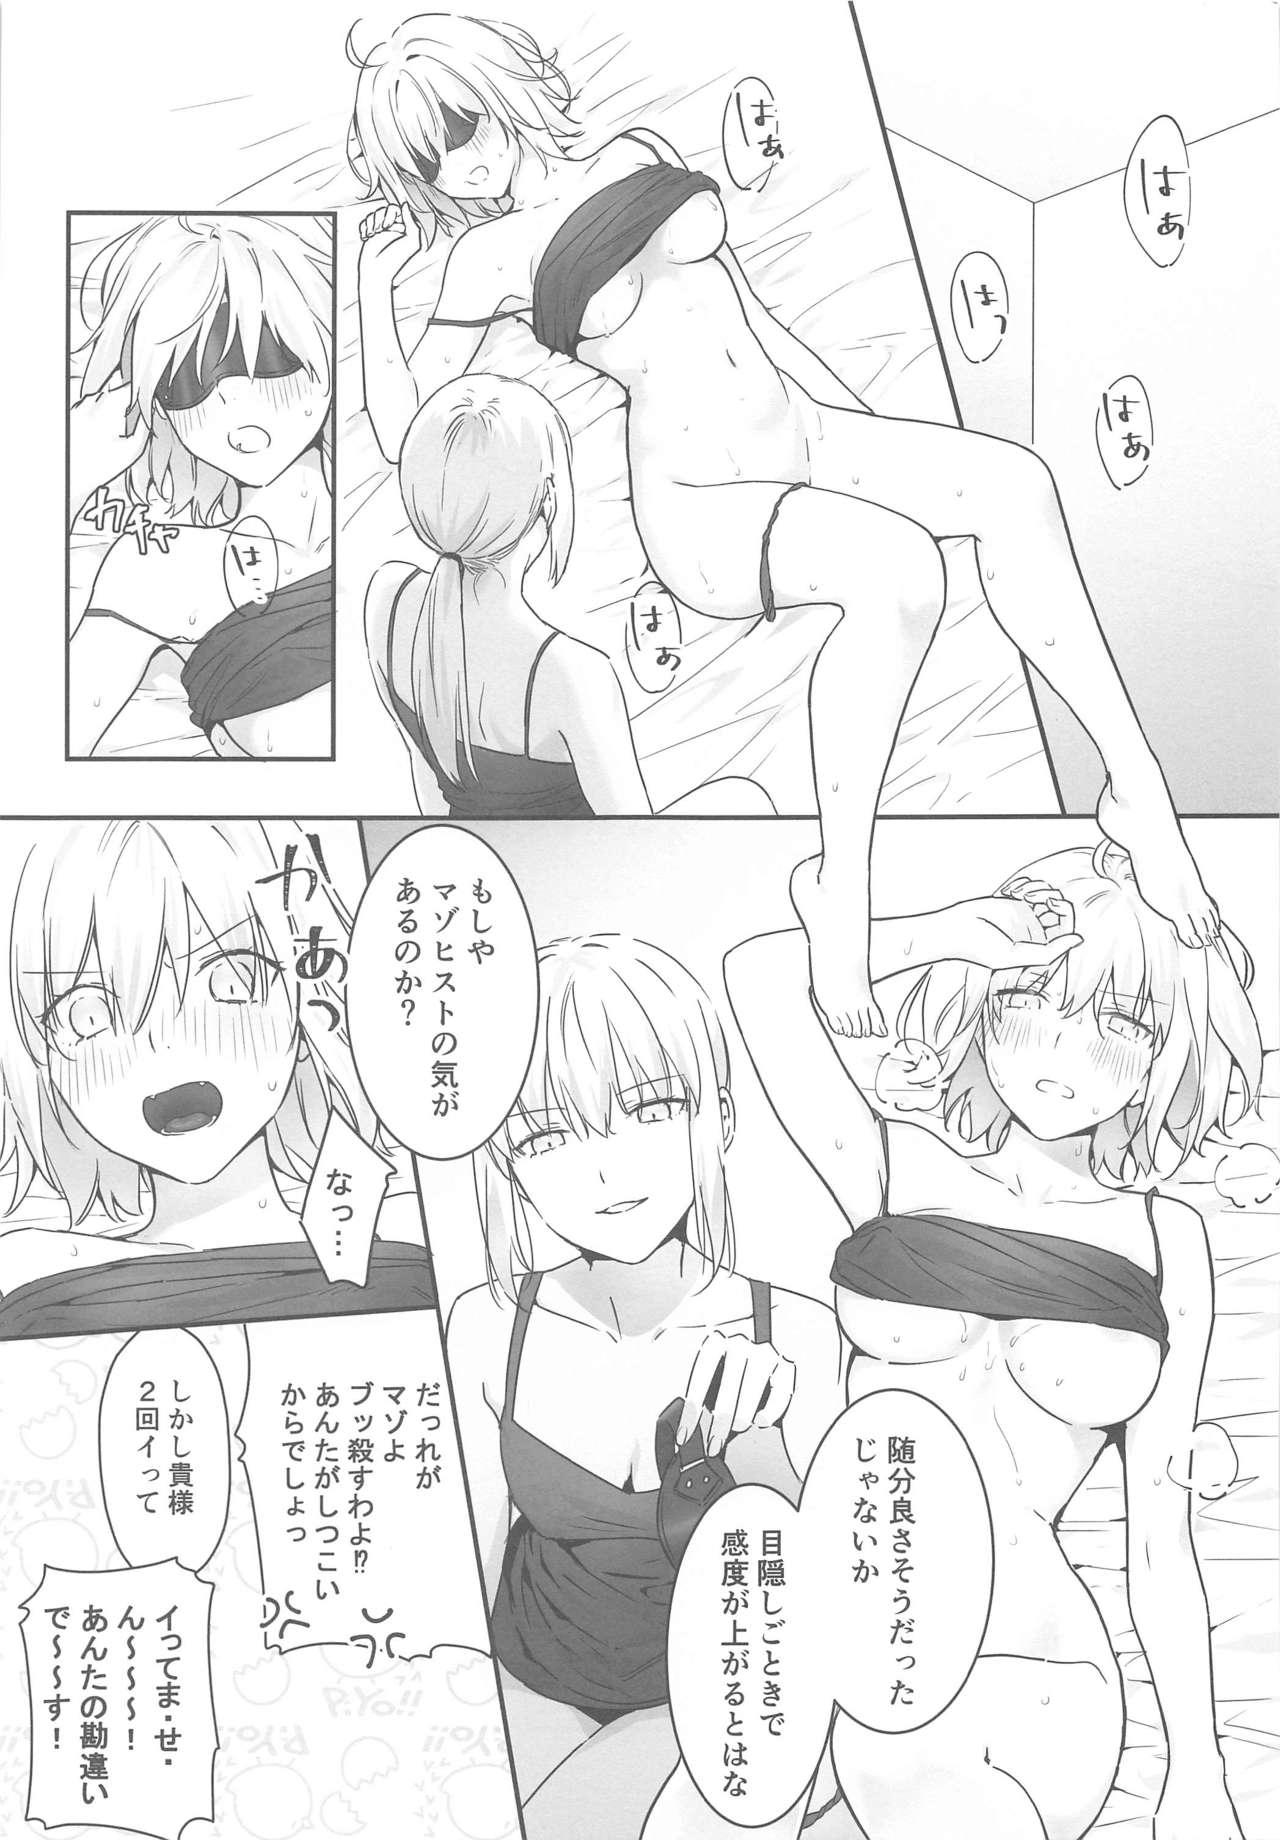 Euro Porn alter's secret. - Fate grand order Chacal - Page 2